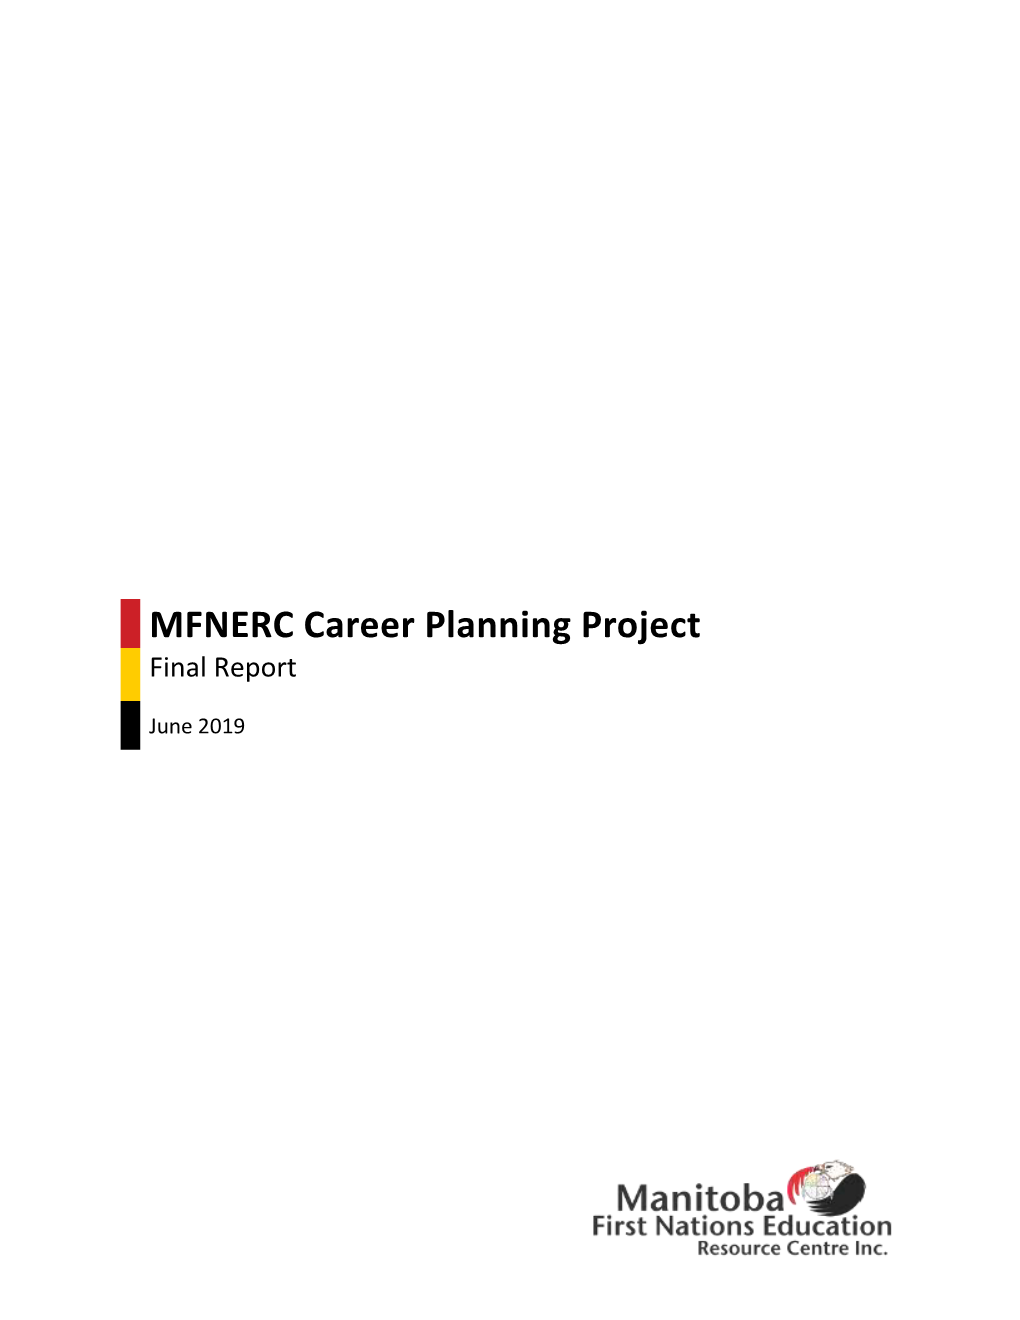 MFNERC Career Planning Project Final Report